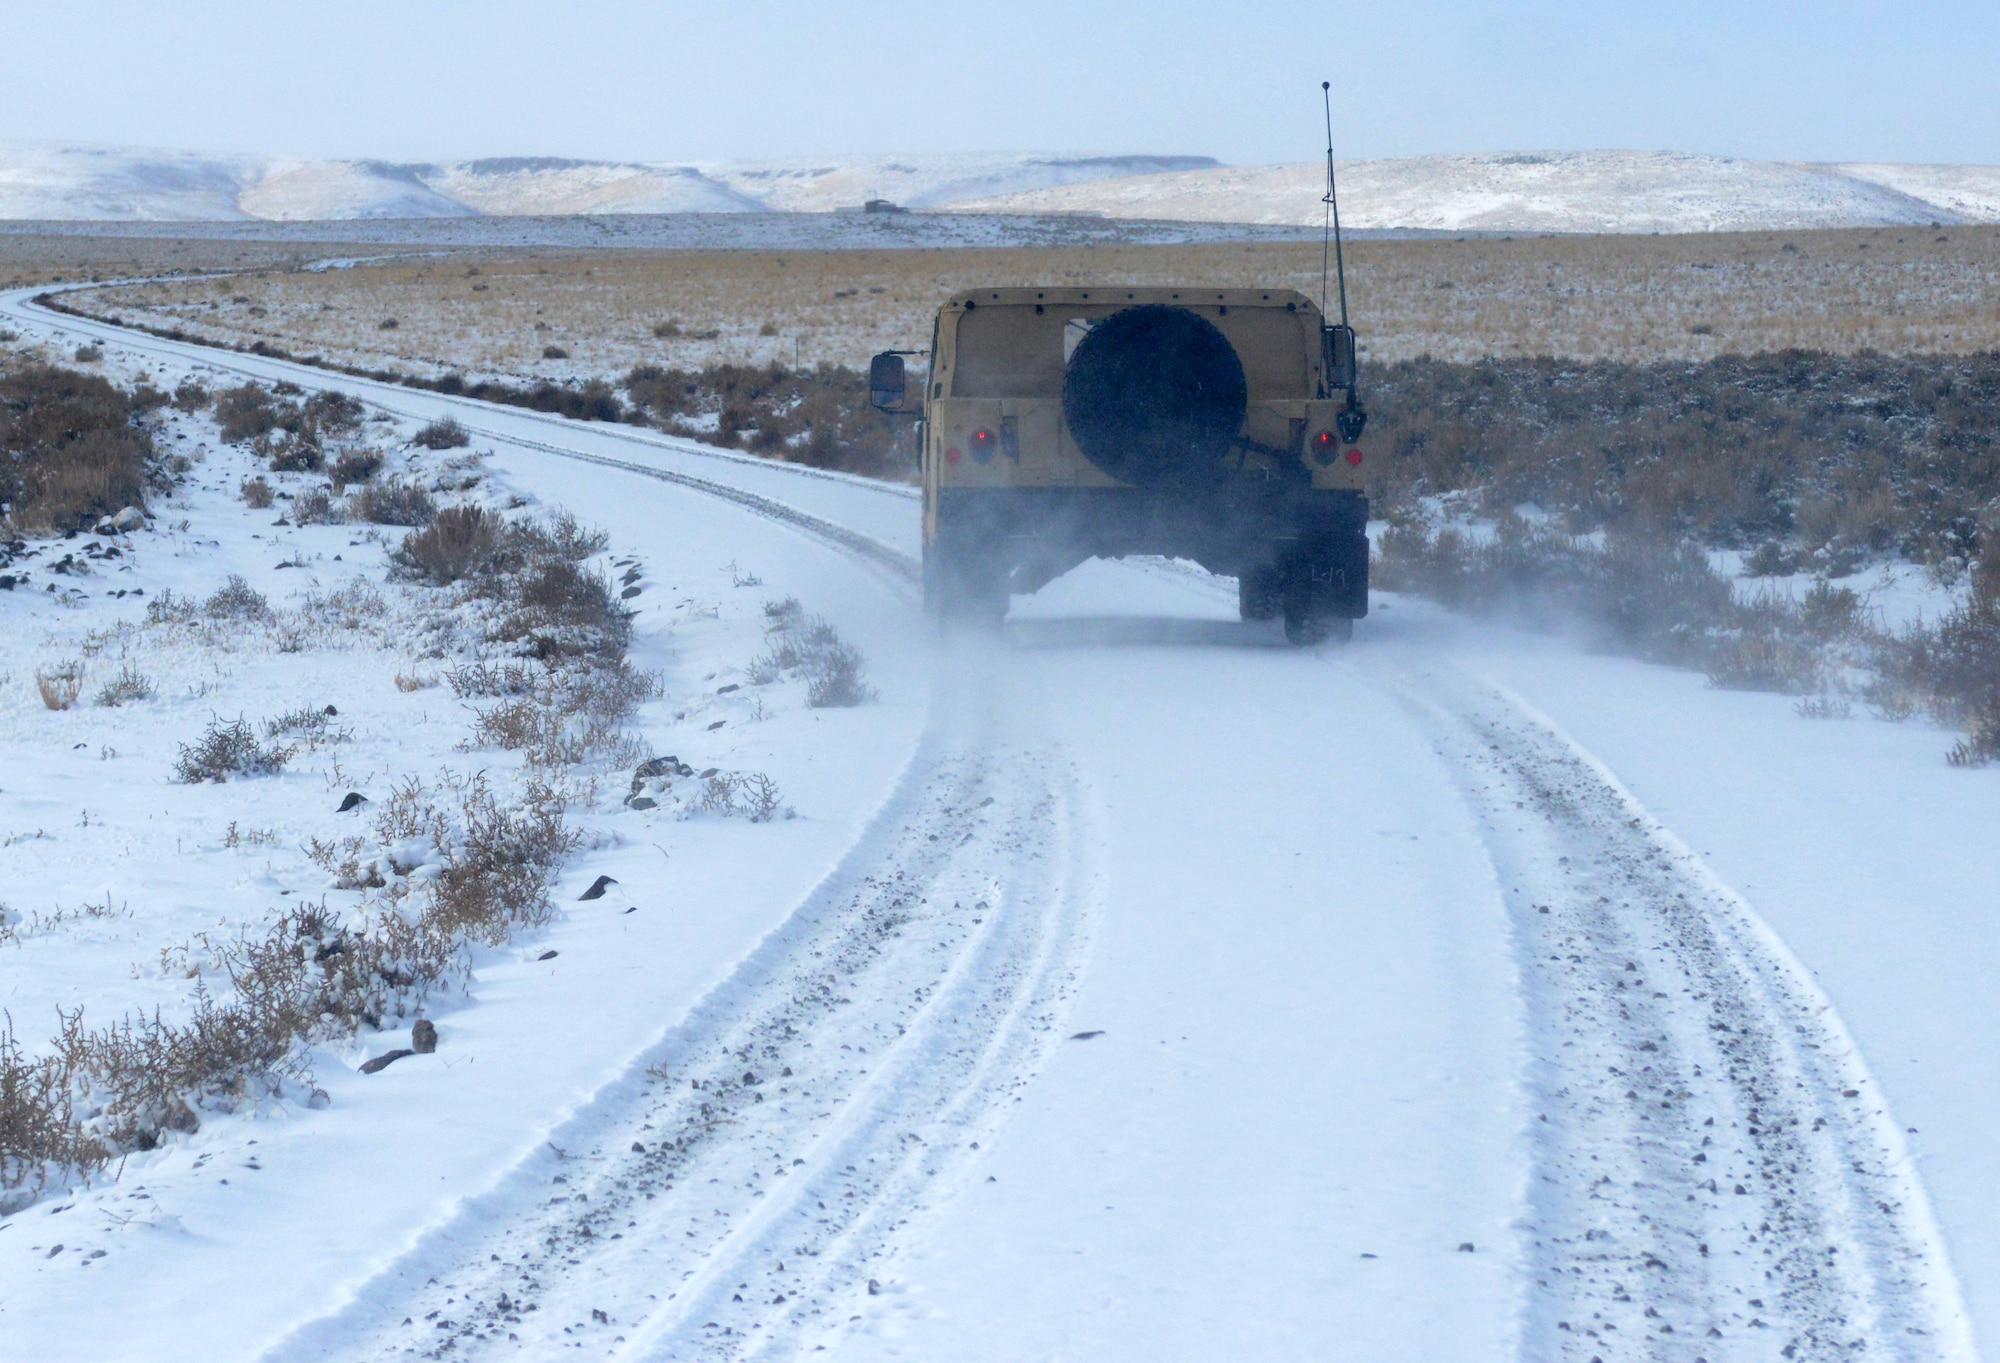 A humvee drives to a training site during the Convoy Operations Readiness Training, Dec. 6, 2013, near Mountain Home Air Force Base, Idaho. 366th Logistic Readiness Squadron vehicle operators are trained on a variety of skills to include emergency vehicle repairs. (U.S. Air Force photo/Senior Airman Caitlin Guinazu/Released)